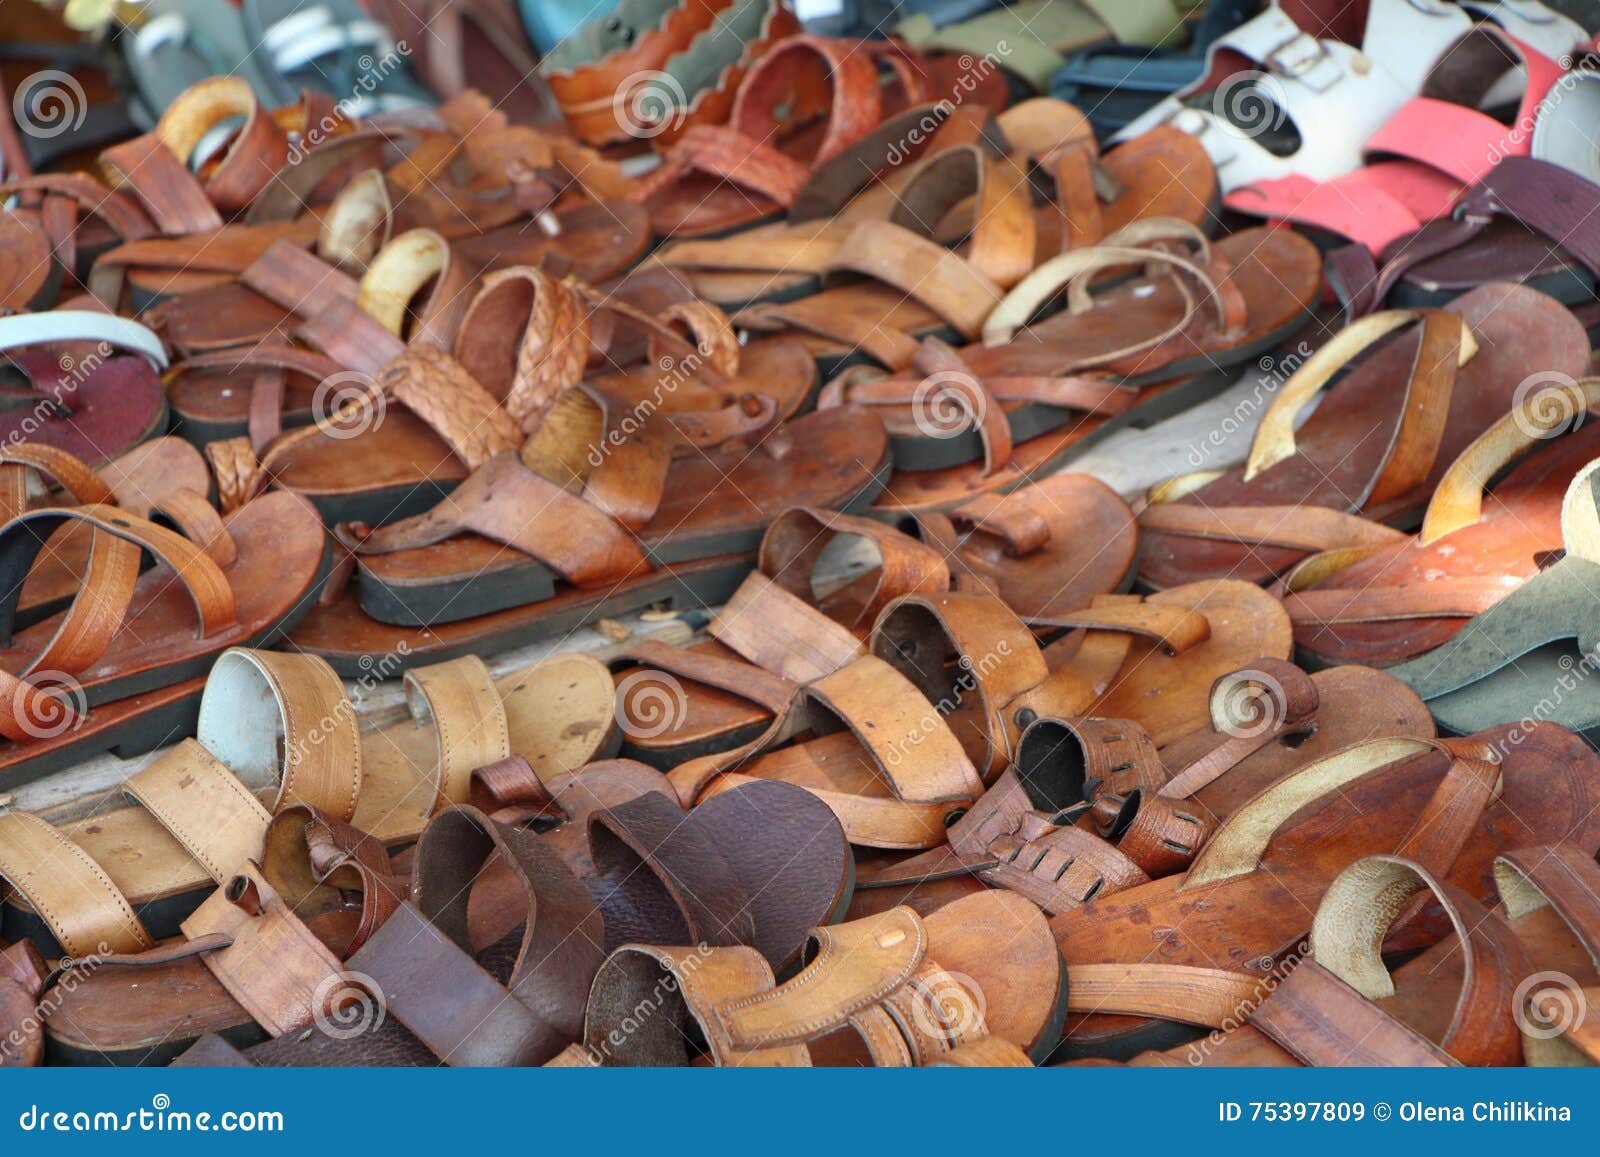 Leather Shoes for Sale. India. Market Stock Image - Image of sandals ...